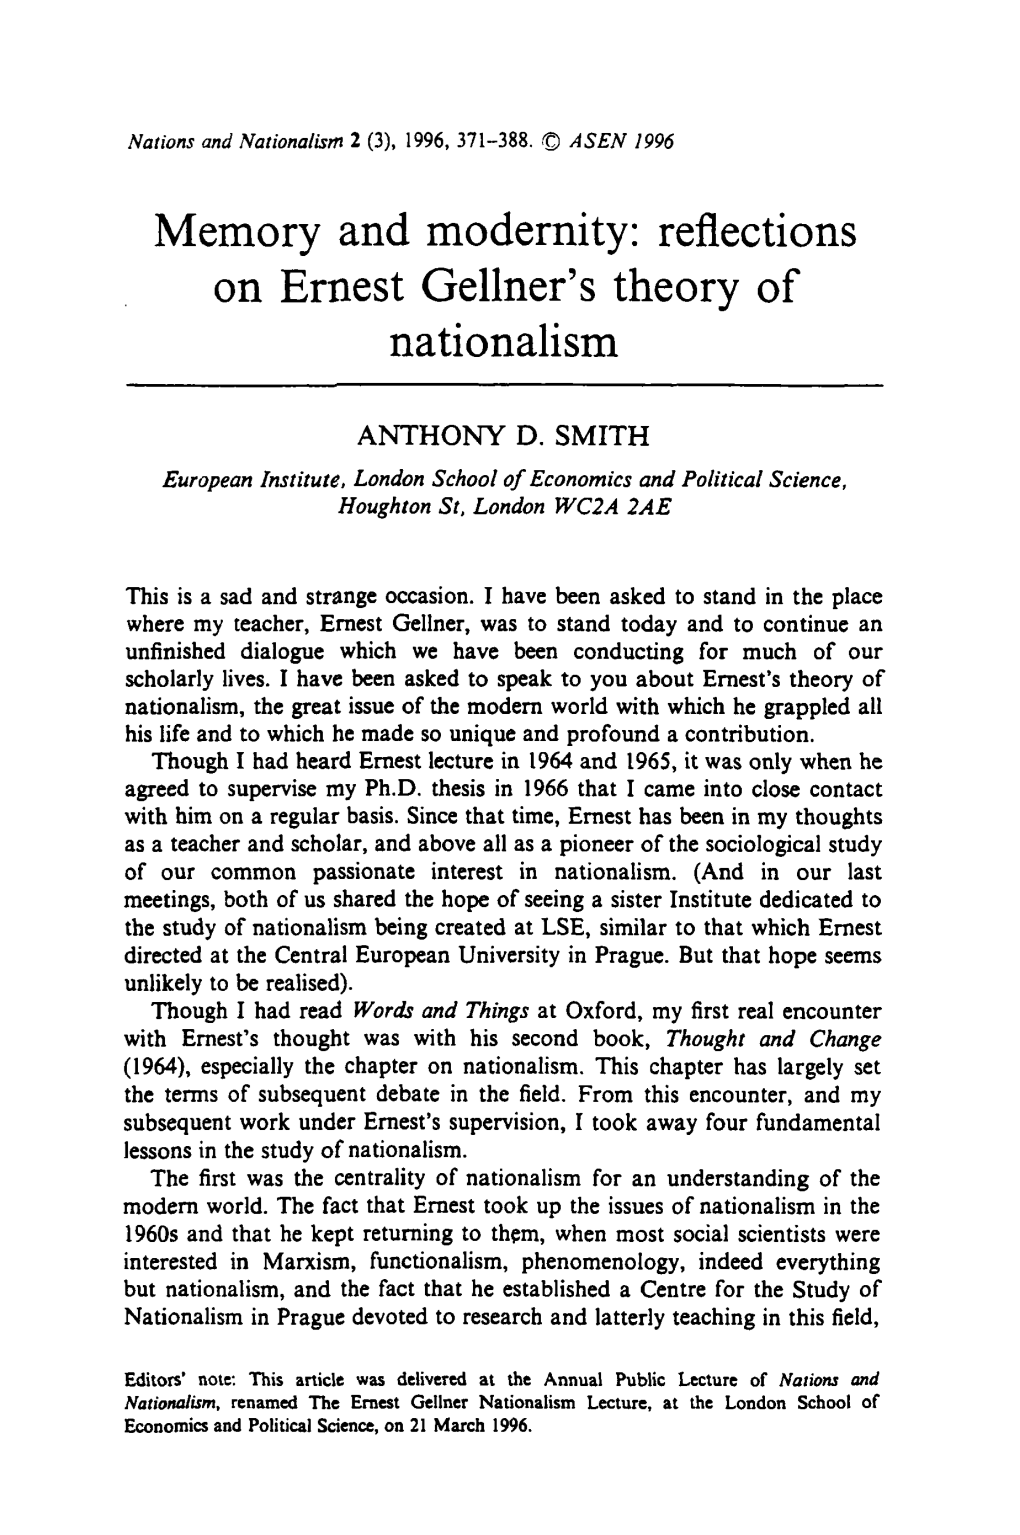 Memory and Modernity: Reflections on Ernest Gellner's Theory of Nationalism